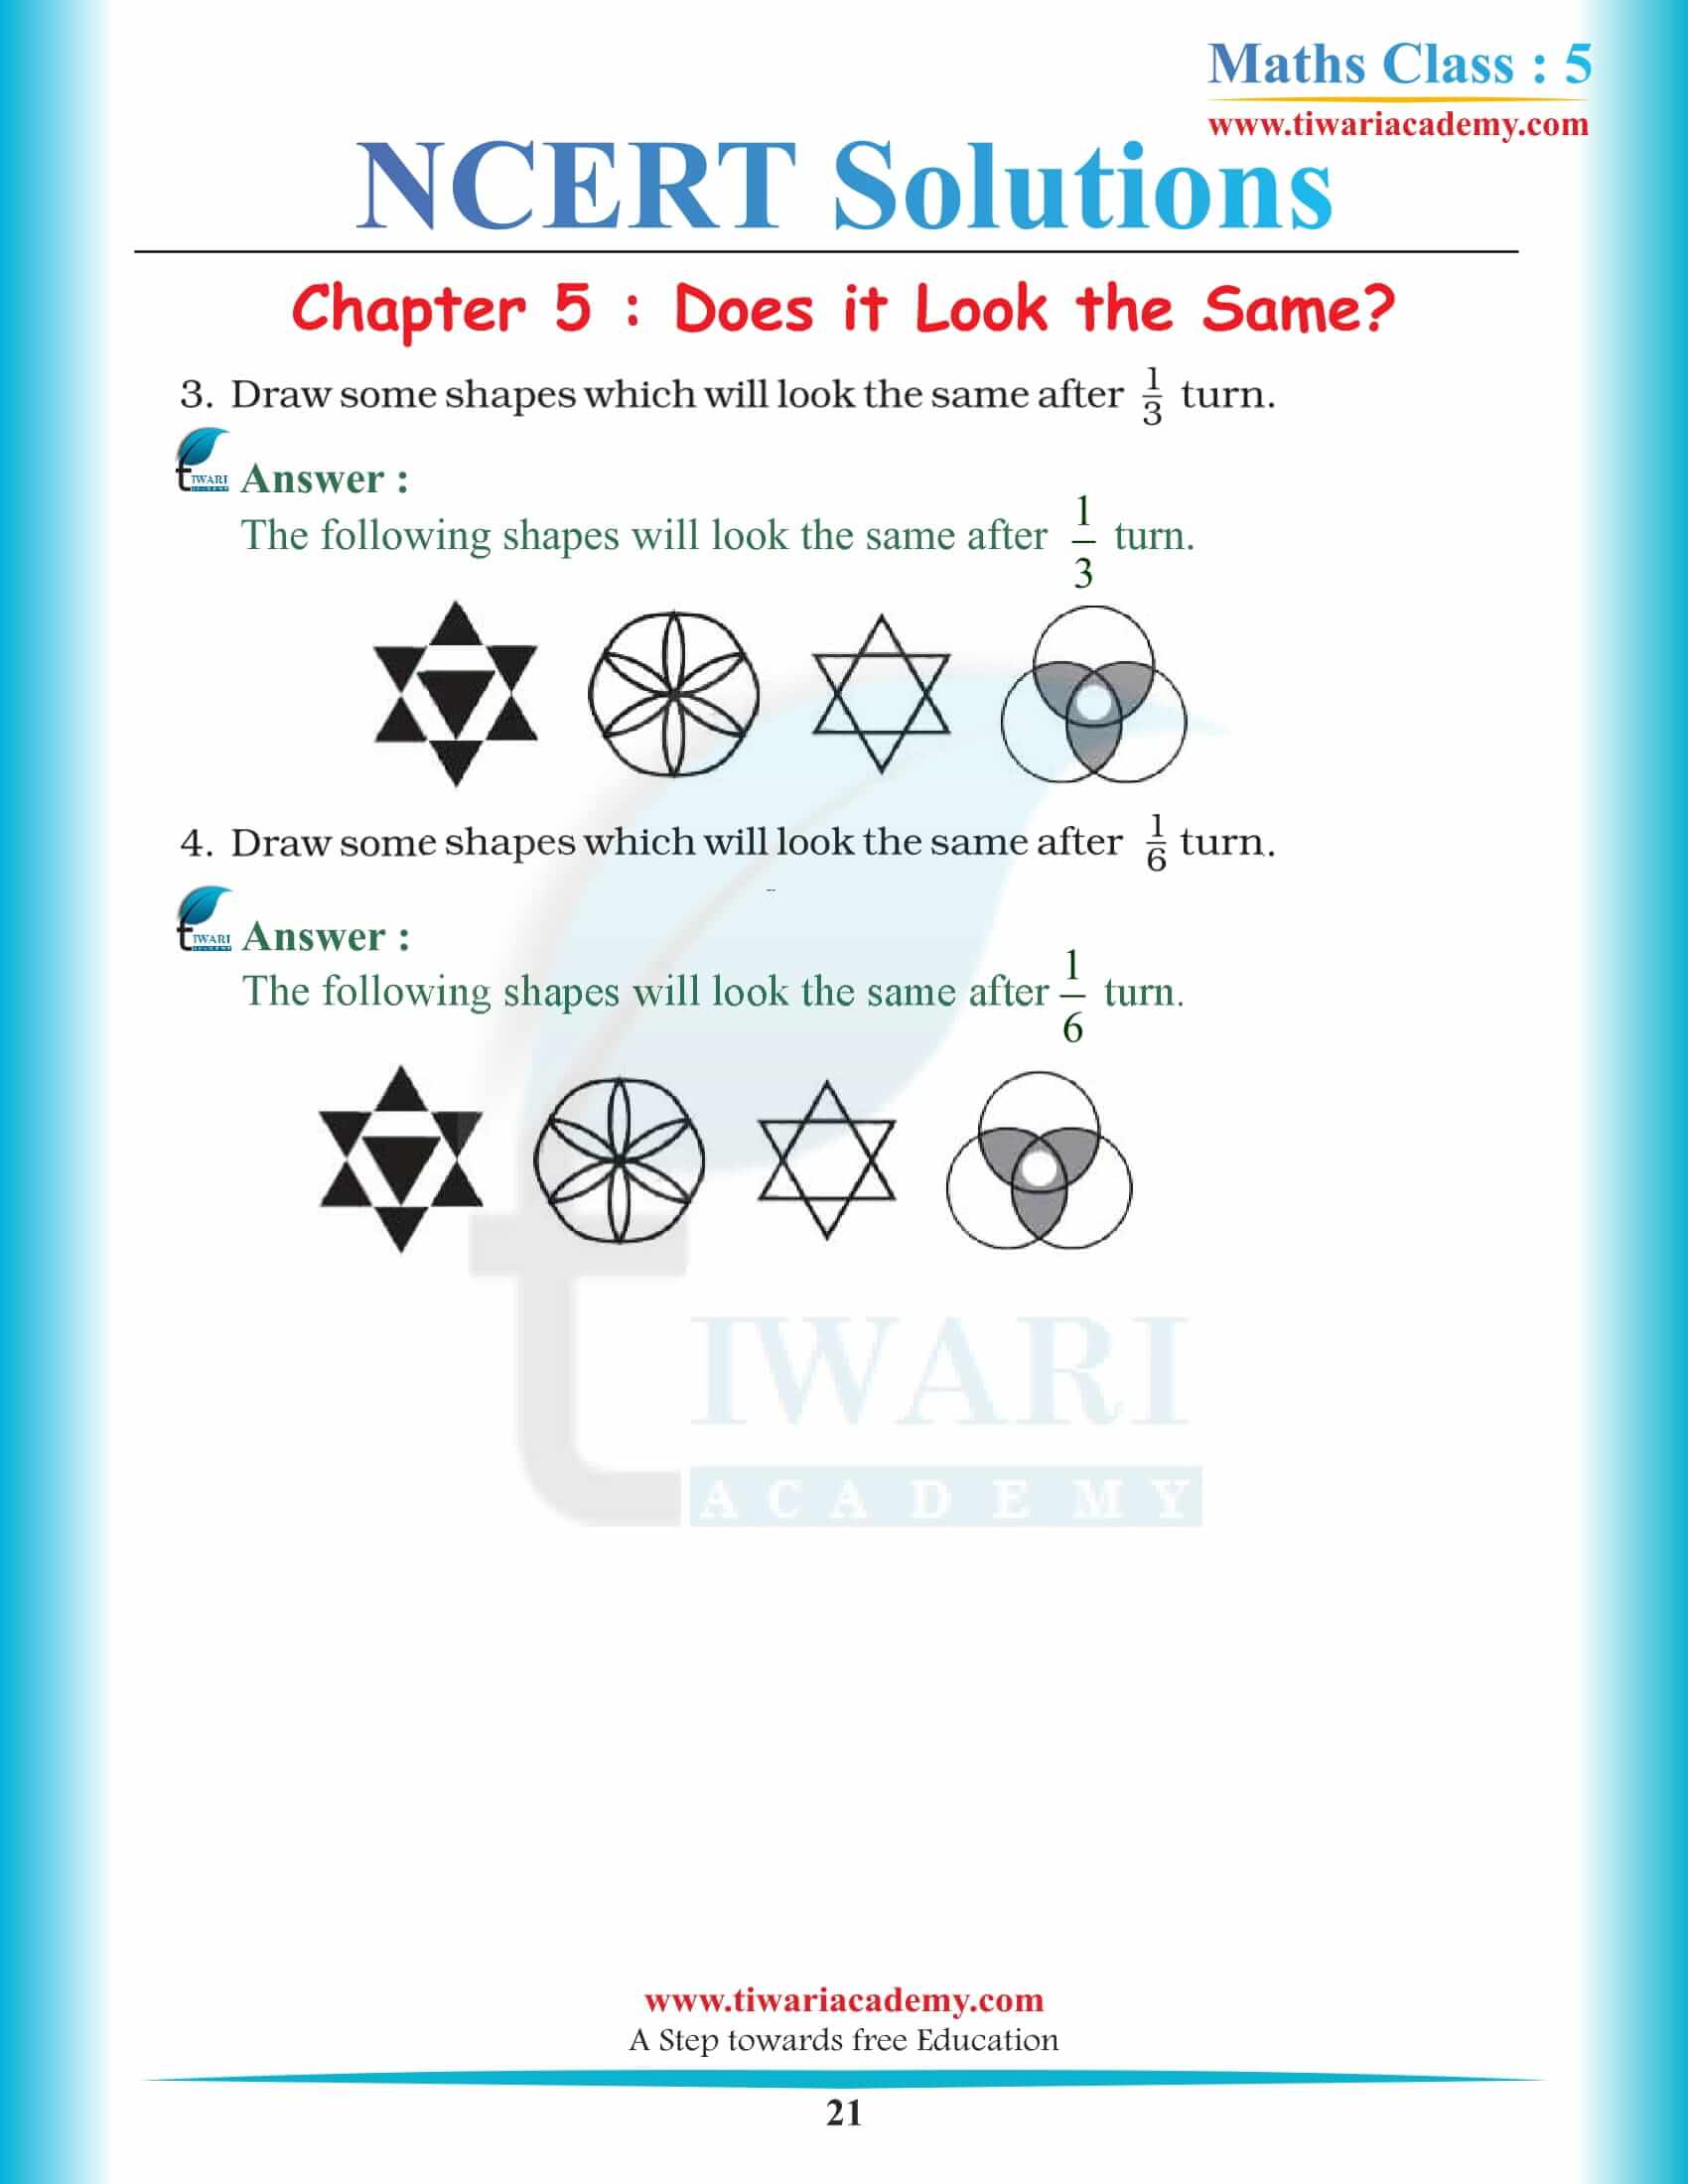 5th Math Magic Chapter 5 Solutions in English